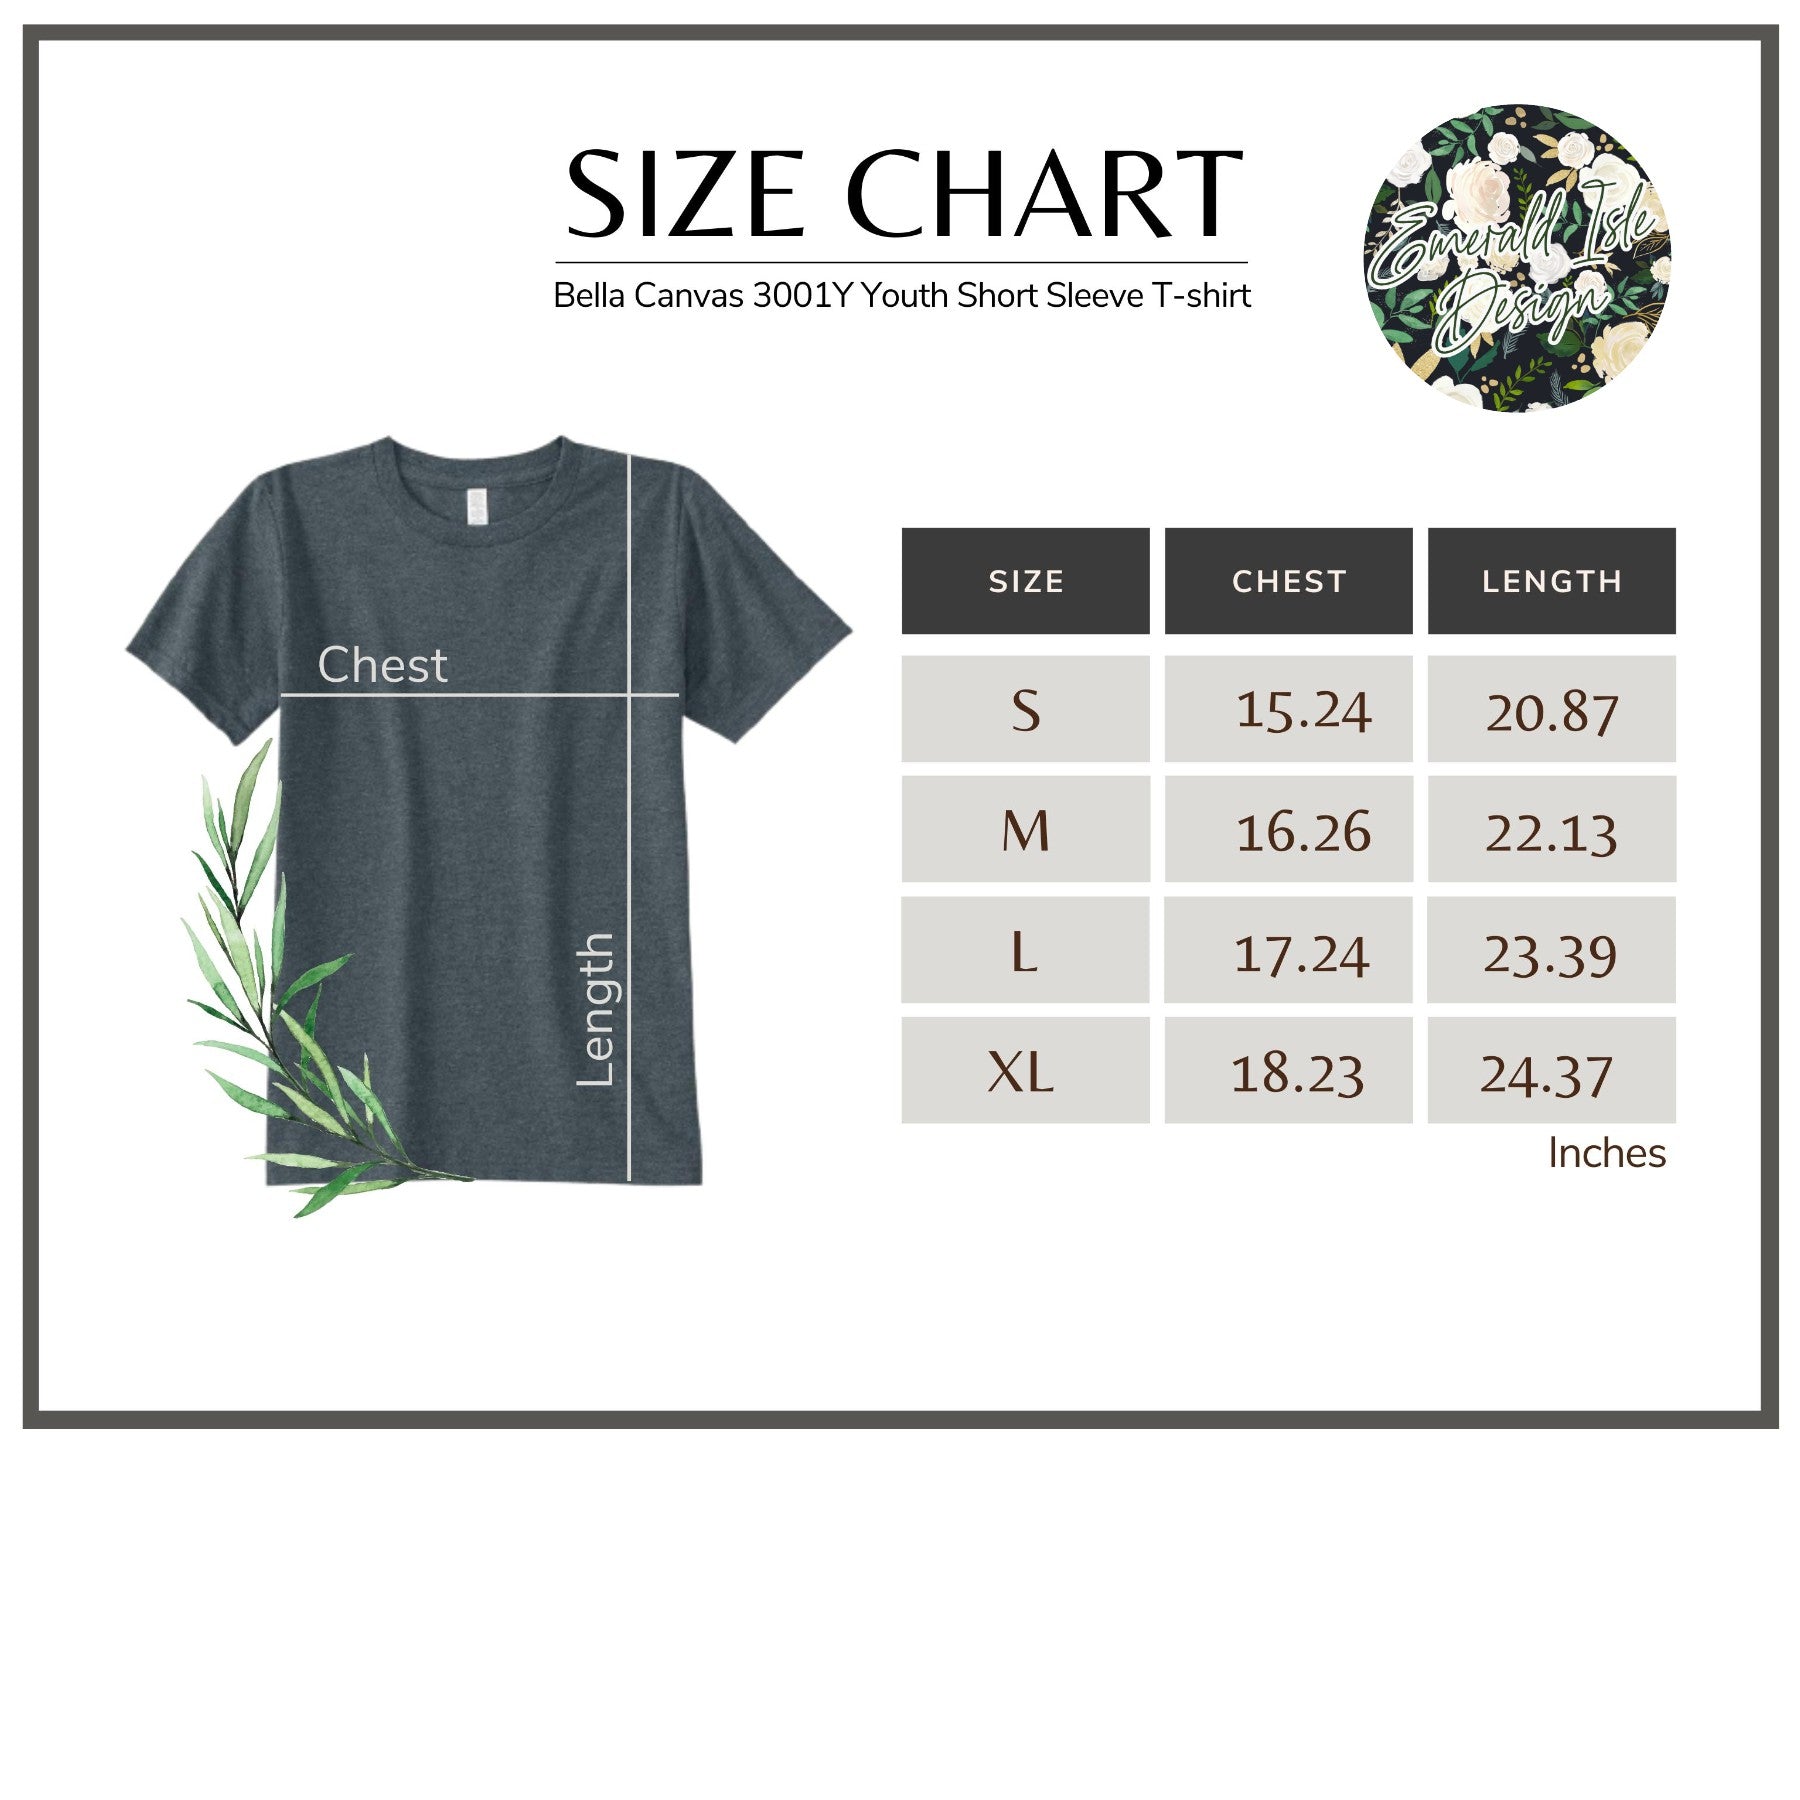 SIZE CHART | BELLA + CANVAS 3001Y YOUTH